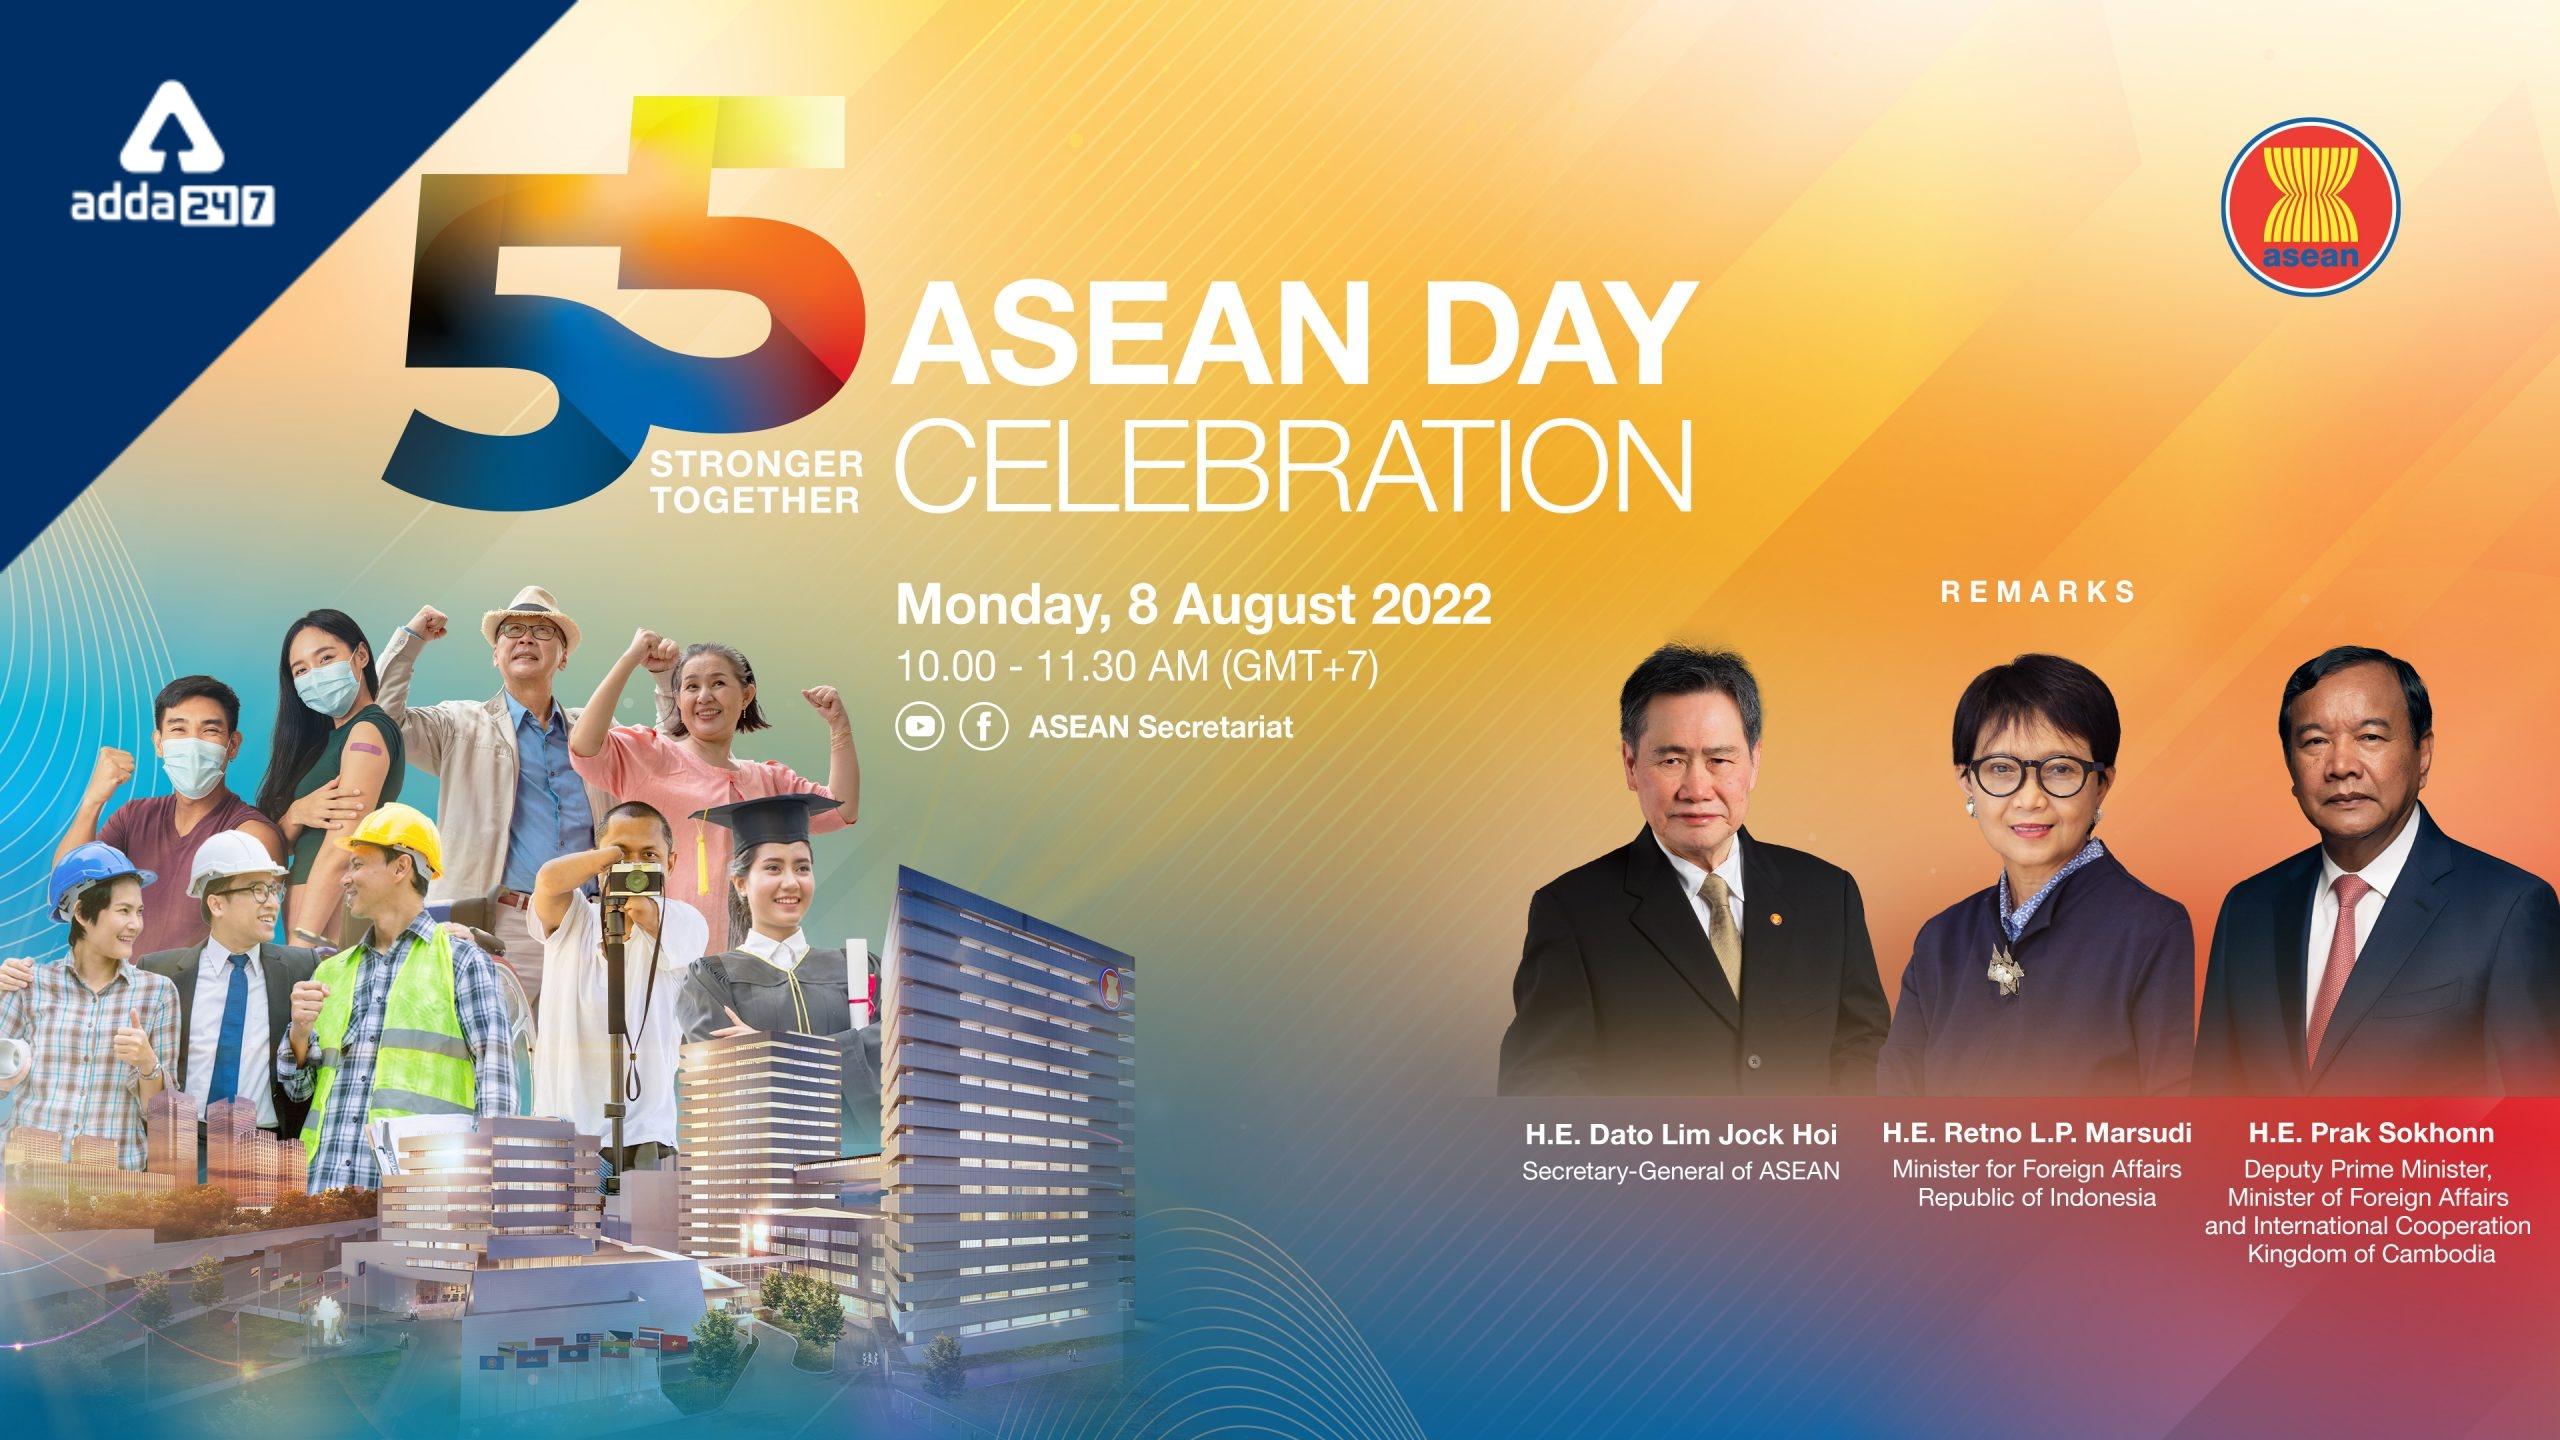 ASEAN Has Celebrated Its 55th Anniversary In 2022._50.1